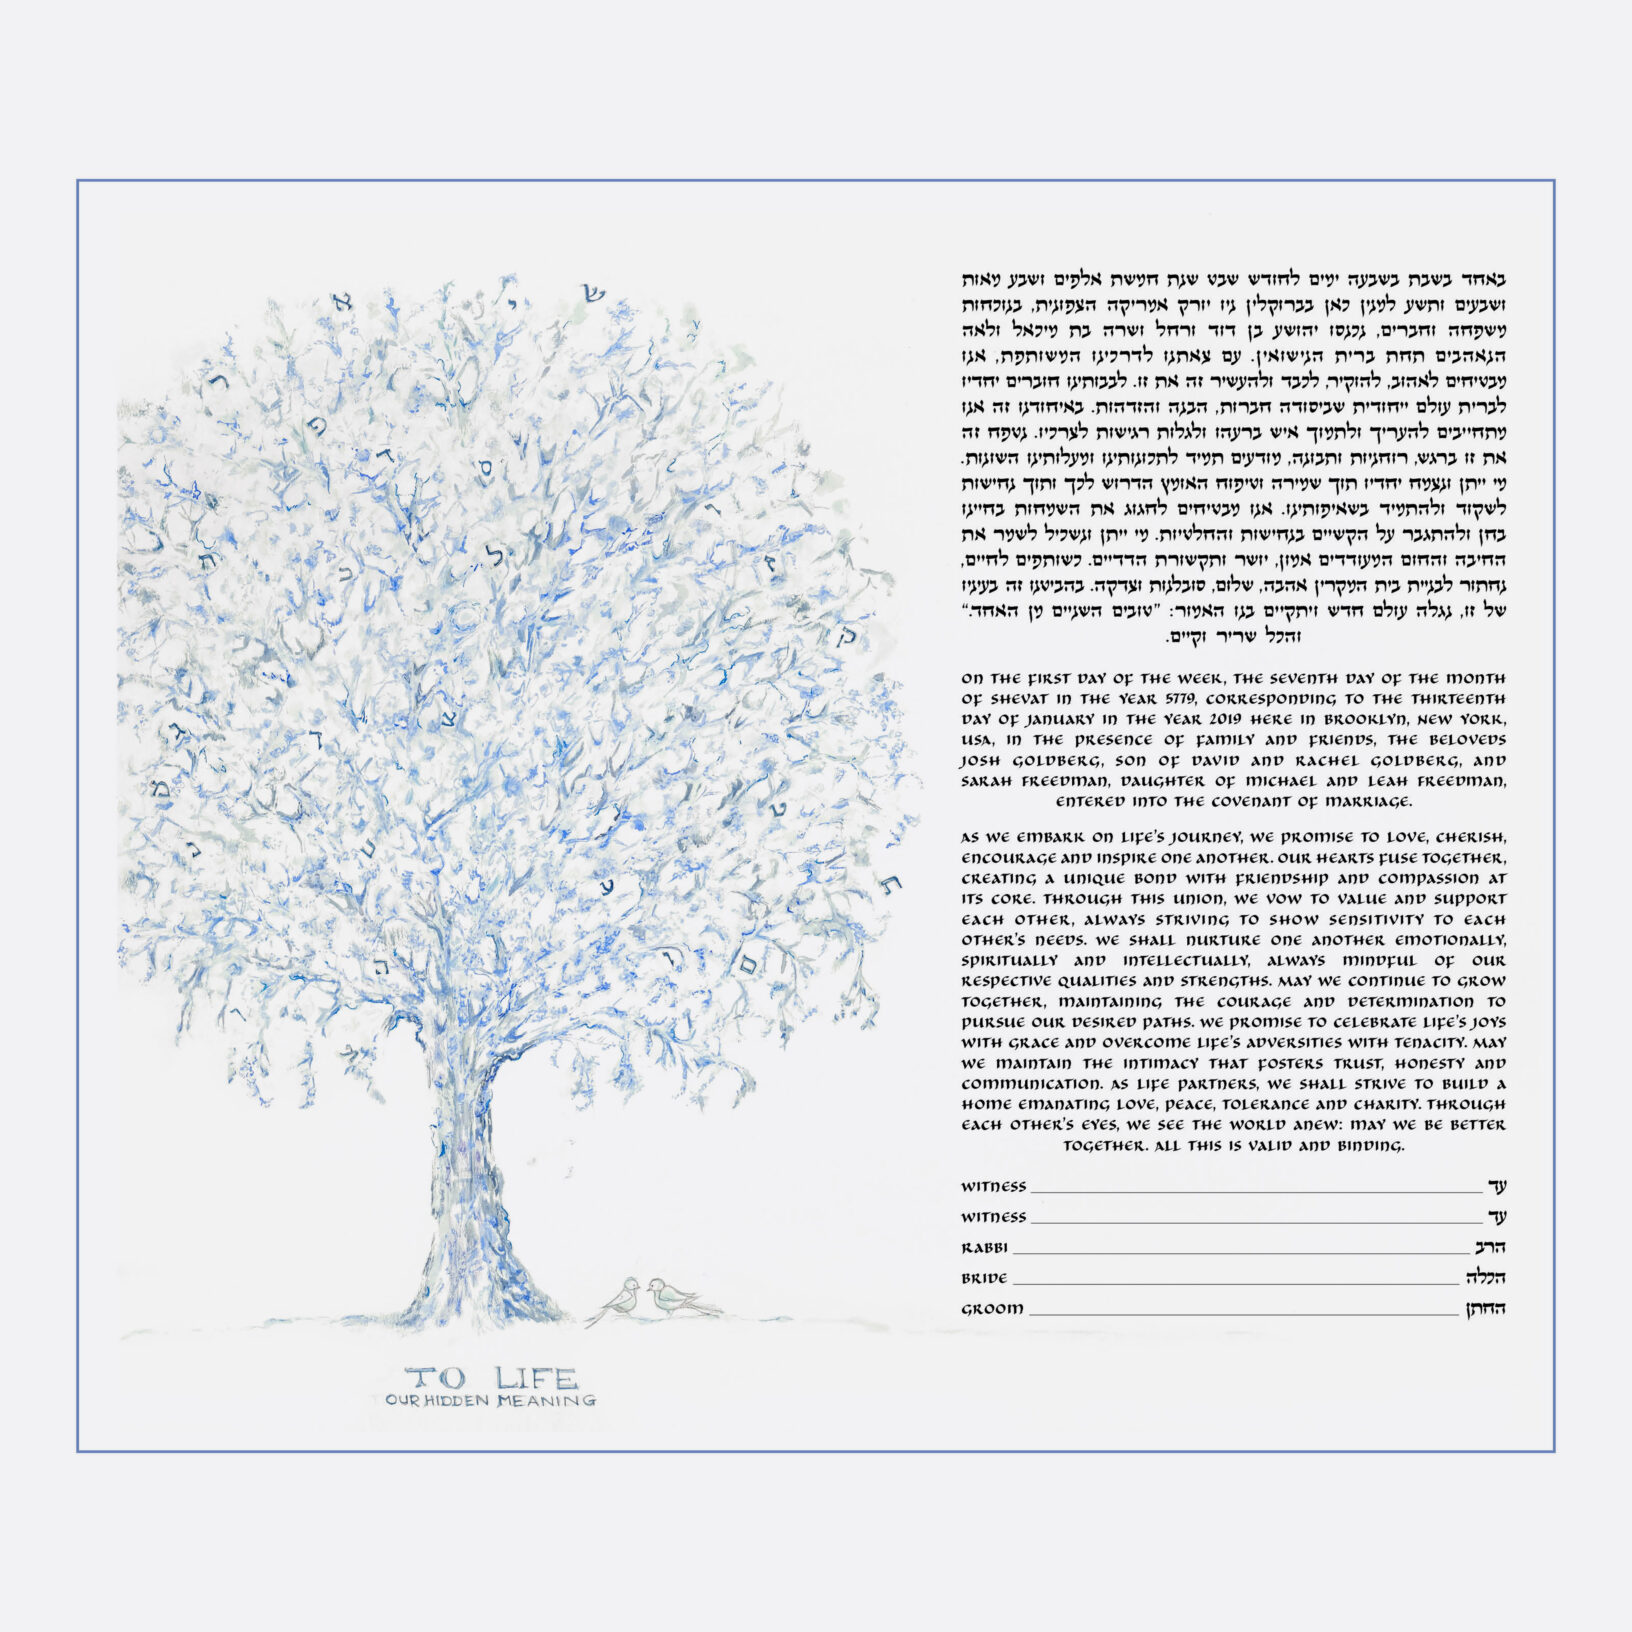 Angela Munitz Giclee Our Hidden Meaning Blue Ketubah Jewish Wedding Contract